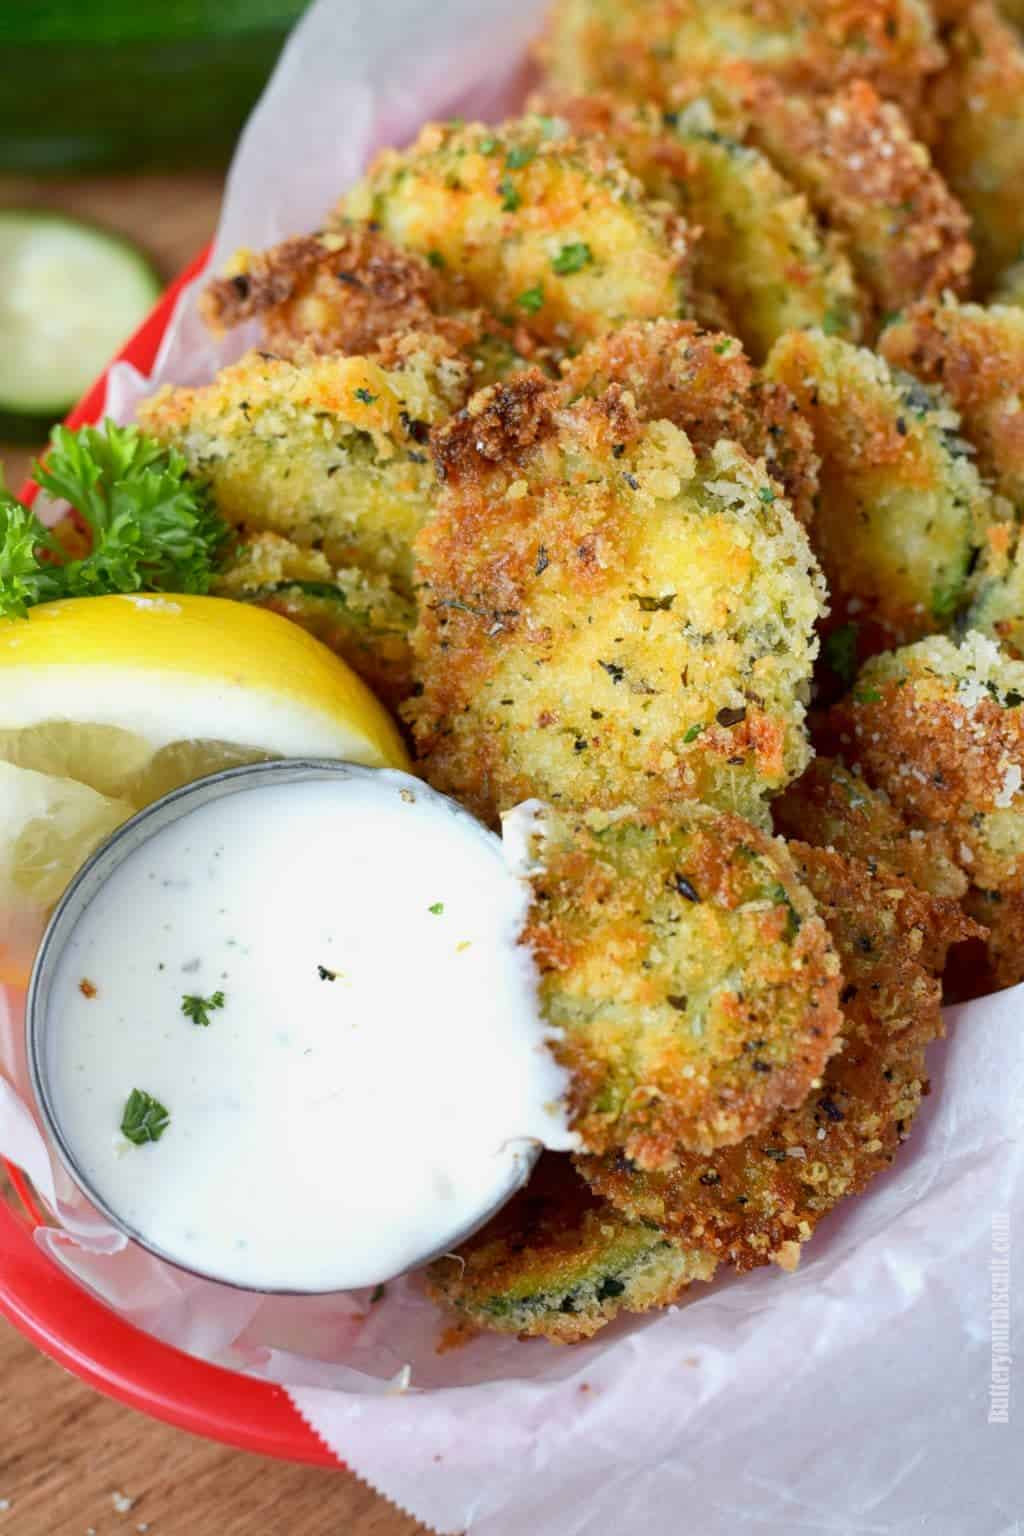 A basket of zucchini crisps with ranch.